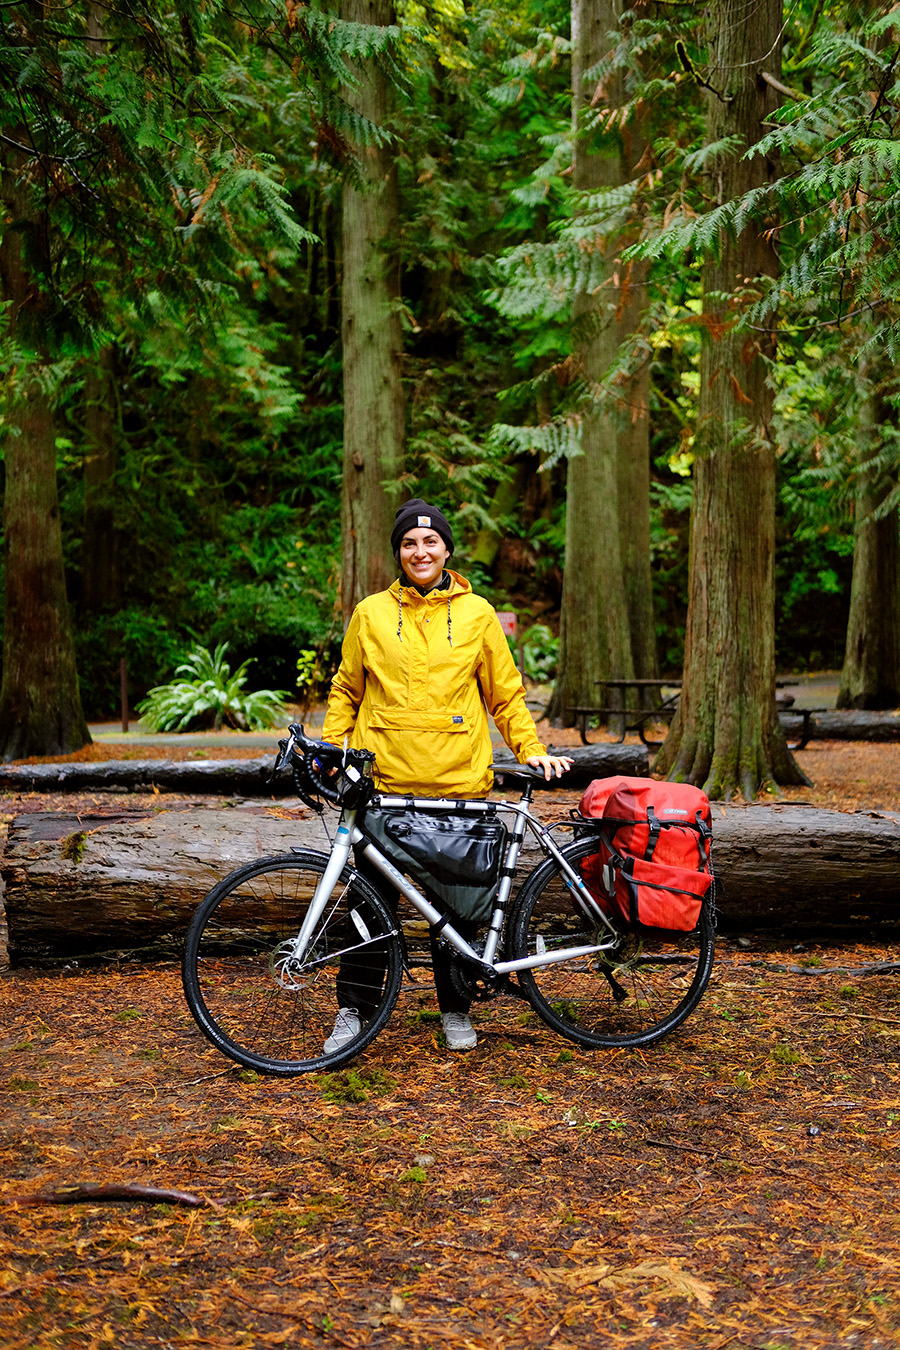 Roxy wears a bright yellow rain jacket as she stands among tall cedar trees with her loaded gravel bike